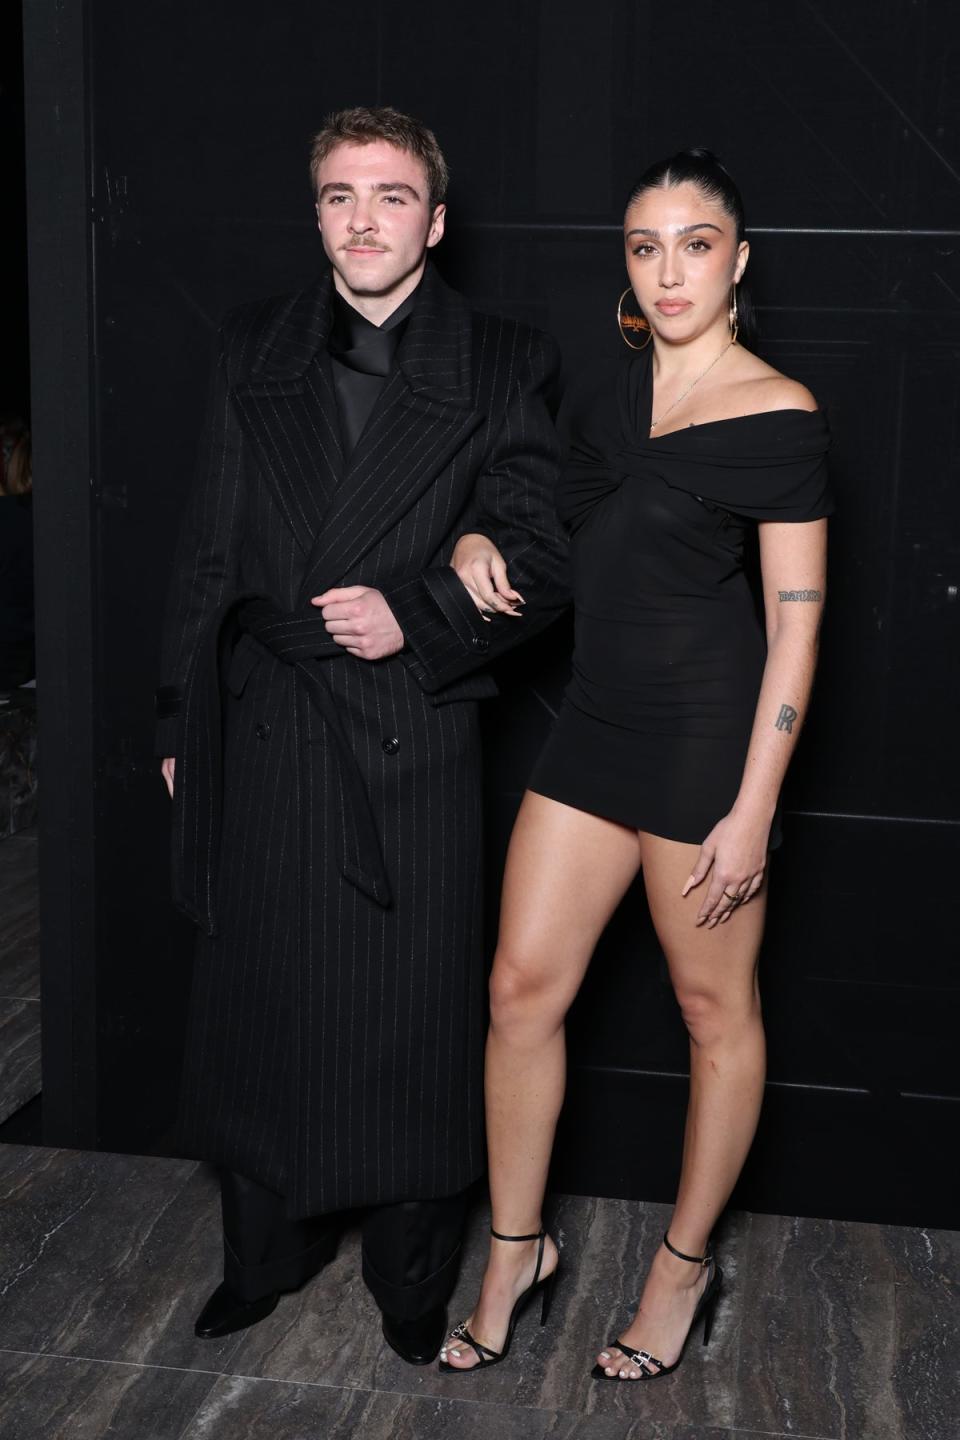 Madonna’s children, Rocco Ritchie and Lourdes Leon, are spotted at Saint Laurent’s show (Pascal Le Segretain / Getty Images)